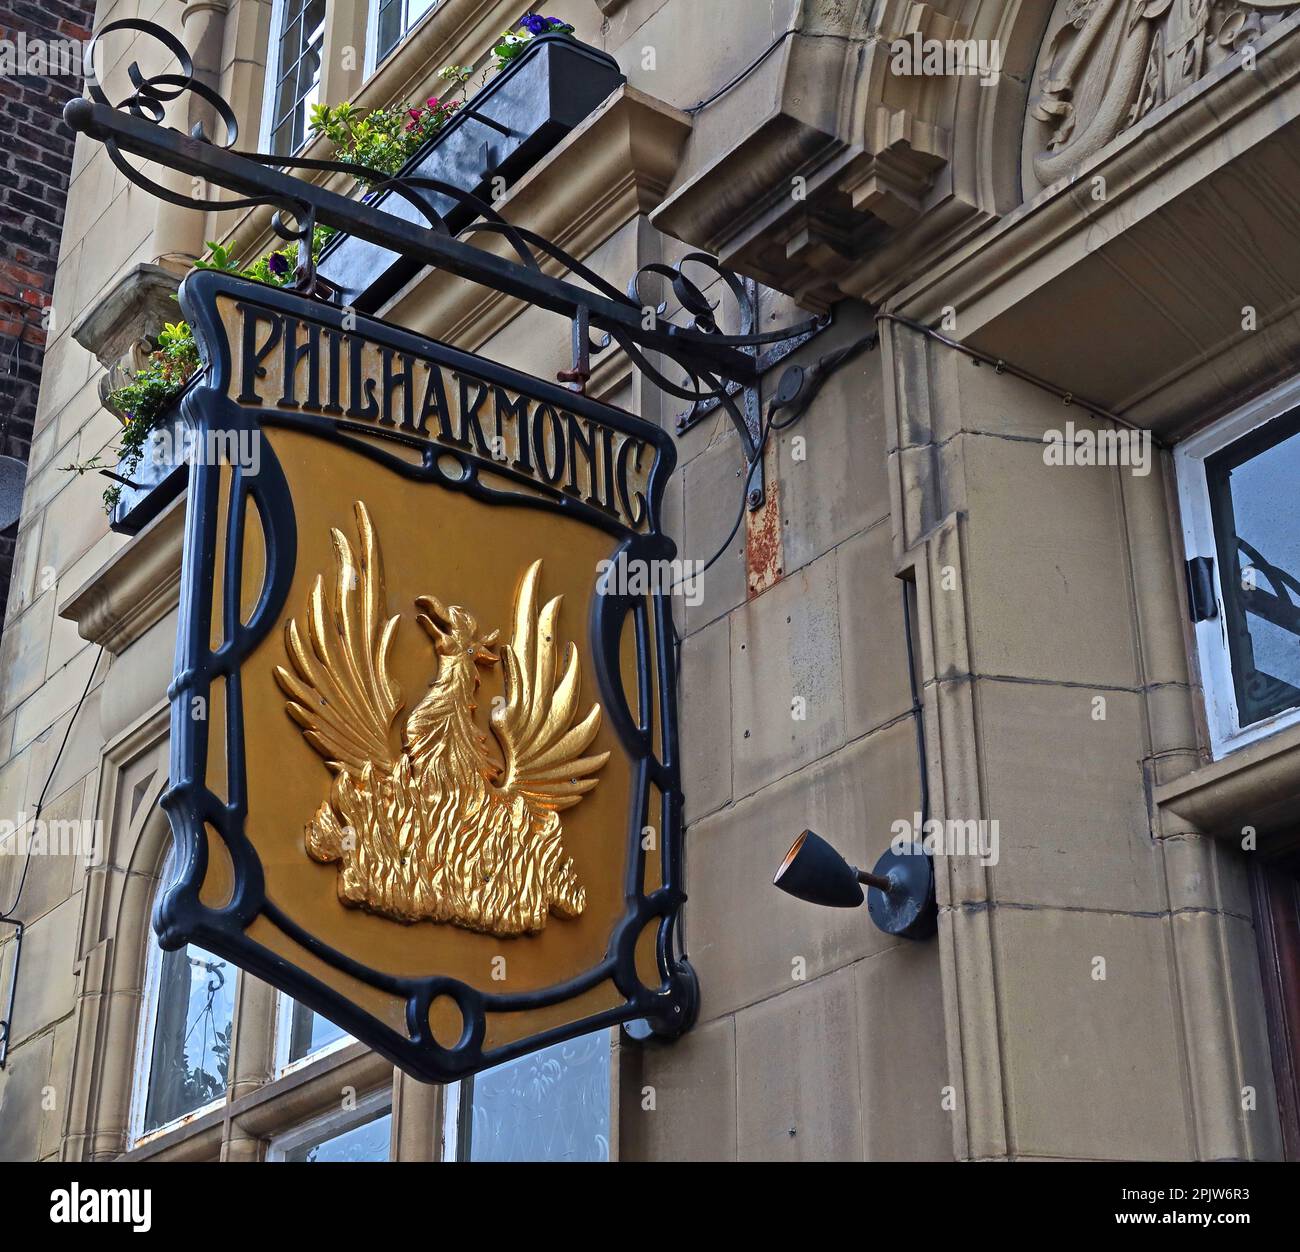 Golden pub sign at entrance to the Philharmonic Dining Rooms, 36 Hope St, Liverpool, Merseyside, England, UK, L1 9BX Stock Photo